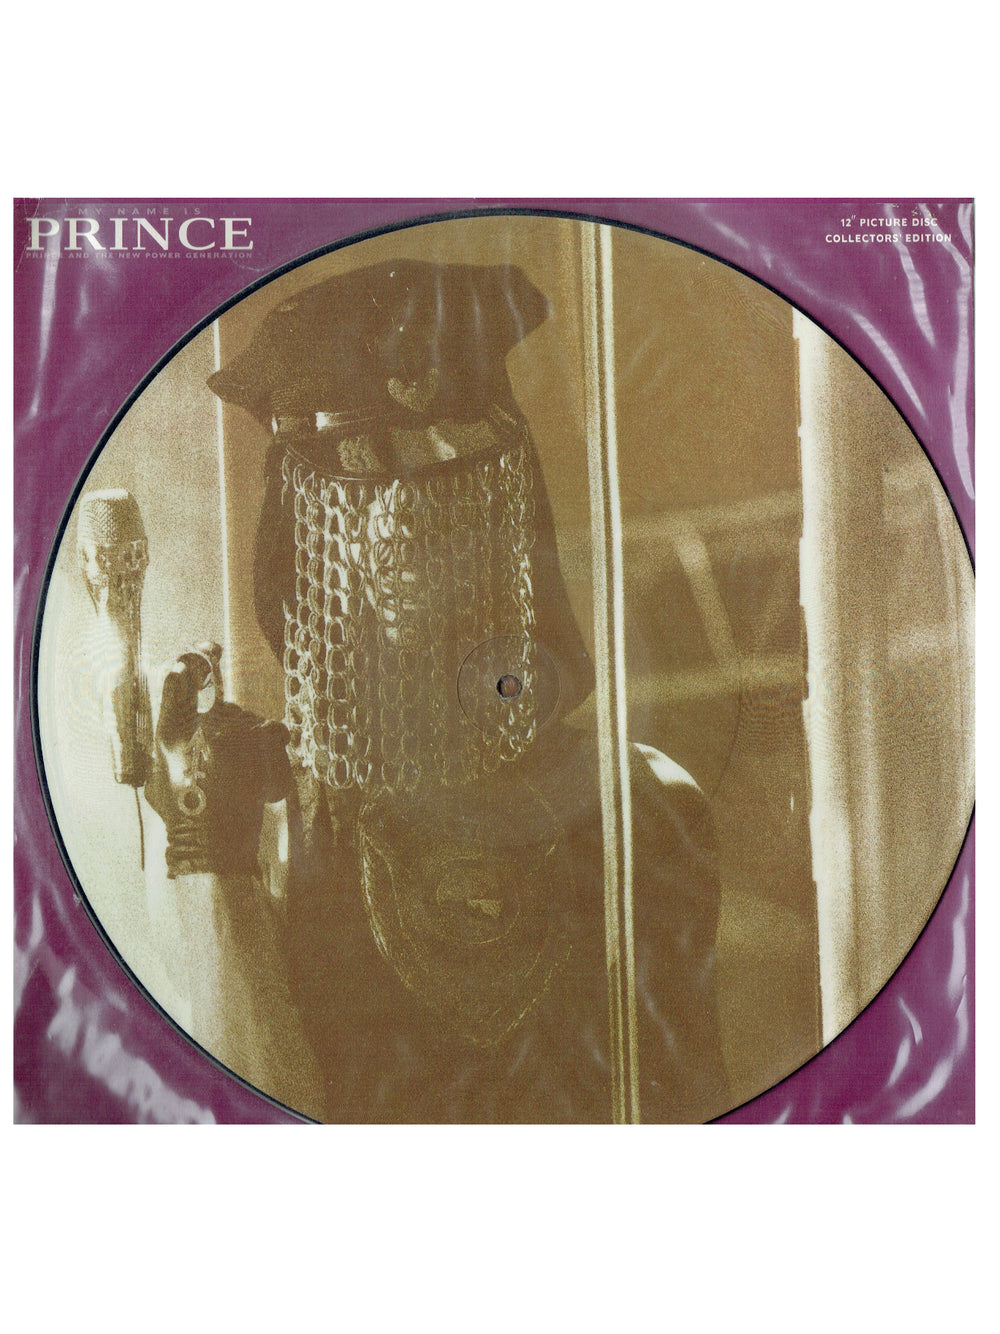 Prince – The New Power Generation - My Name Is Prince Picture Disc 12 Inch Vinyl 1992